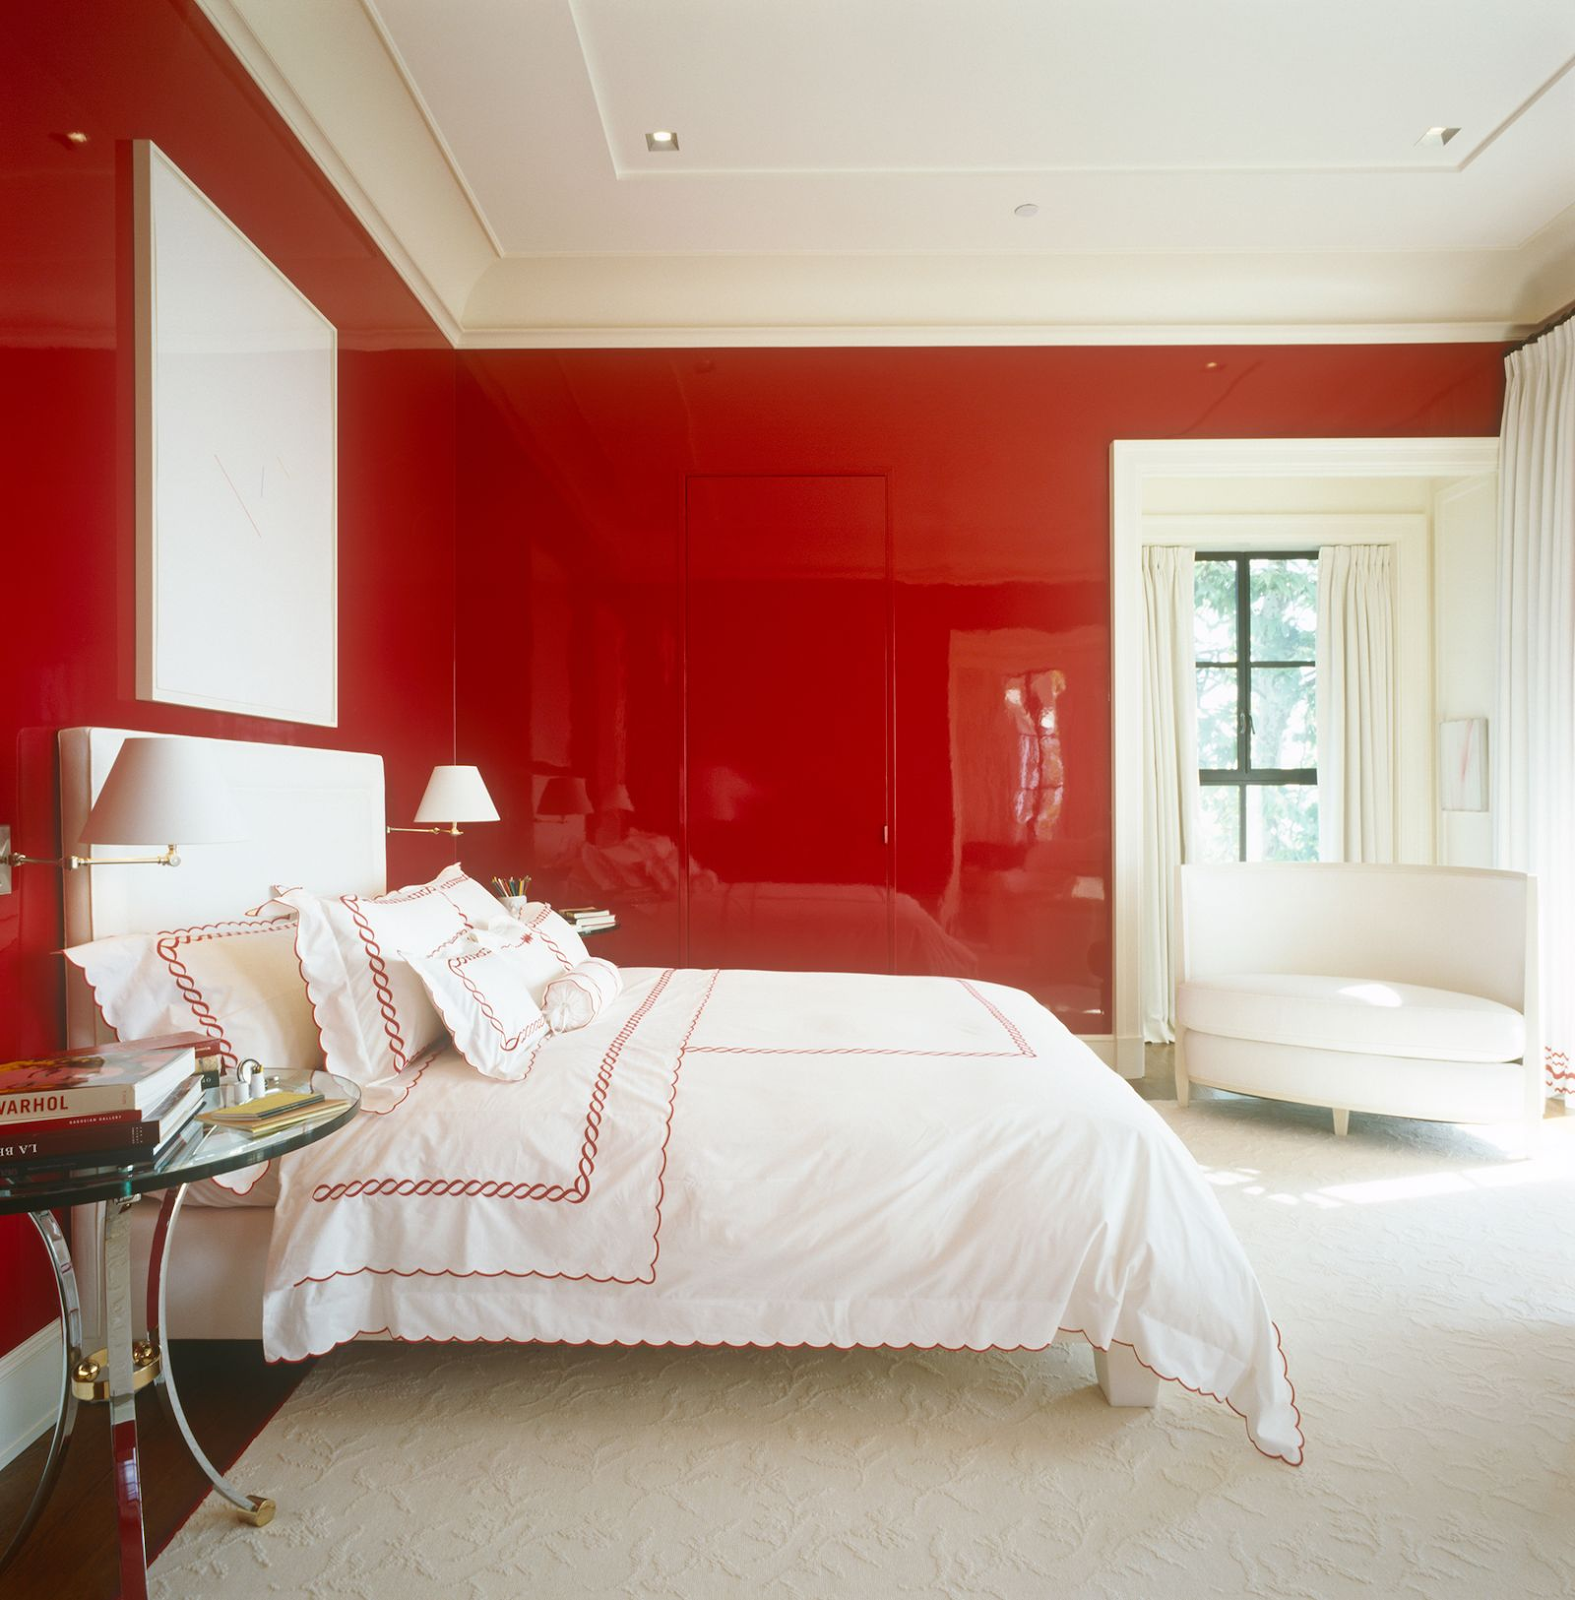 Bedroom paint colours Know ways to bedazzle your room with shine and magnificence